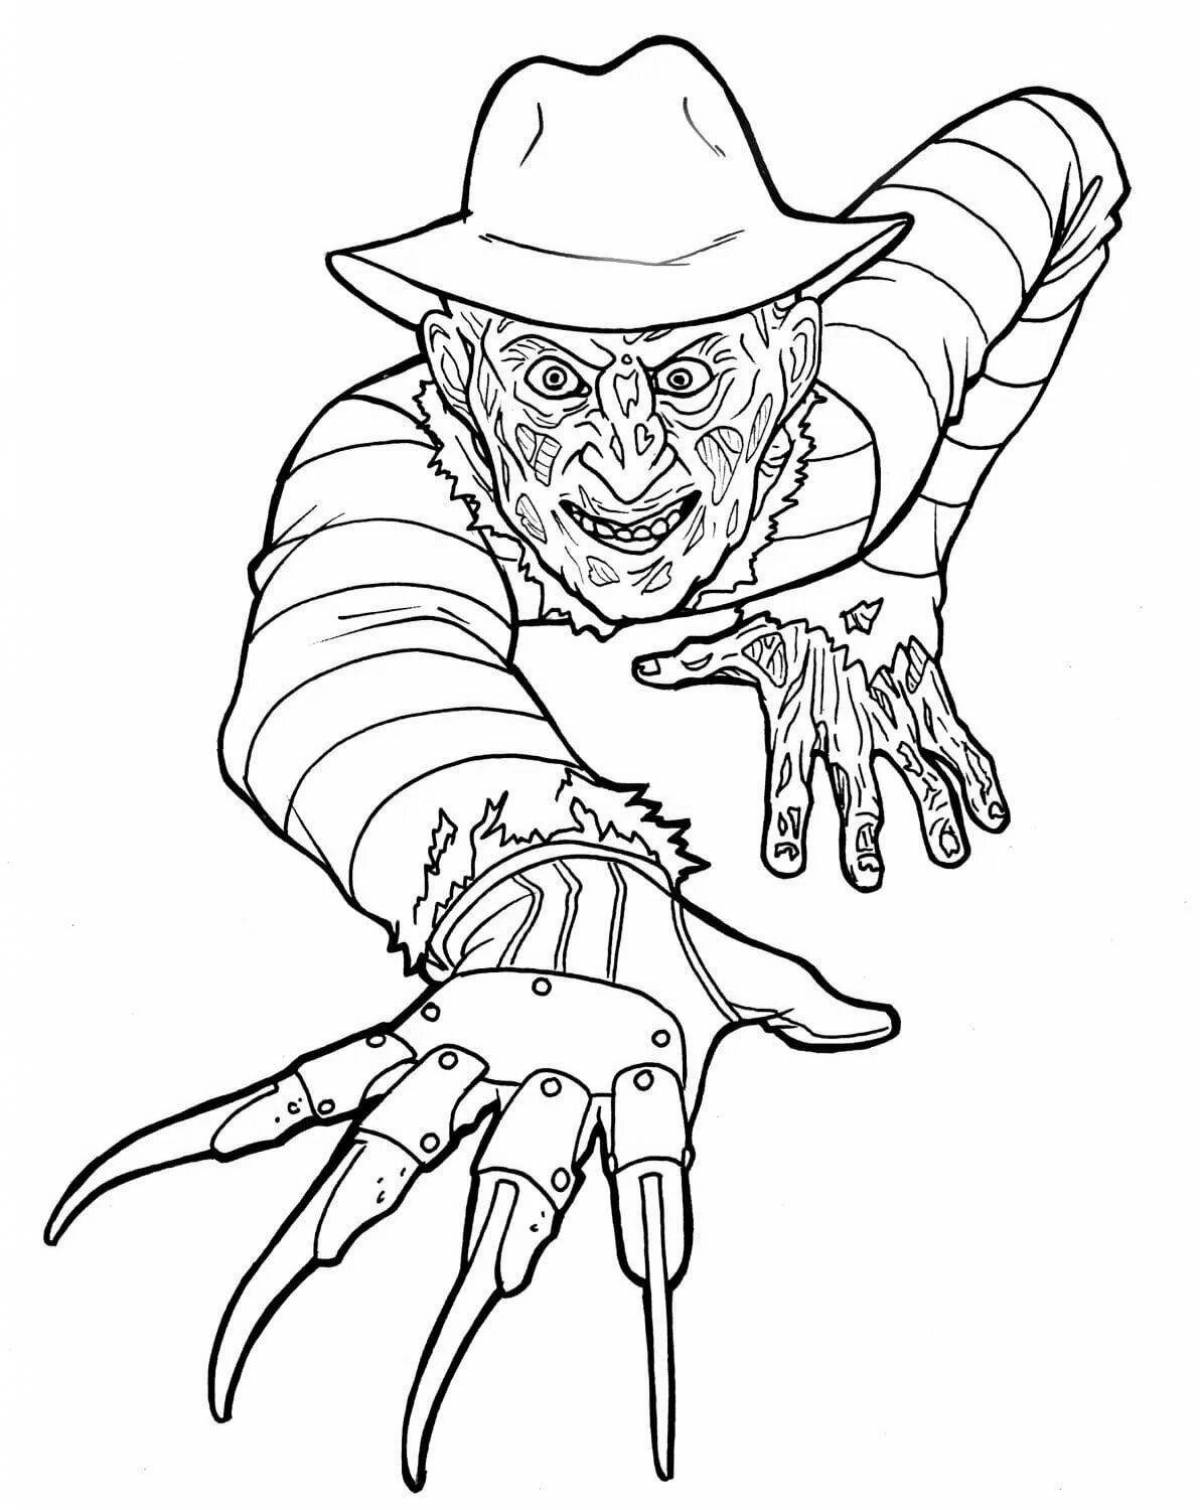 Chilling horror coloring pages for kids